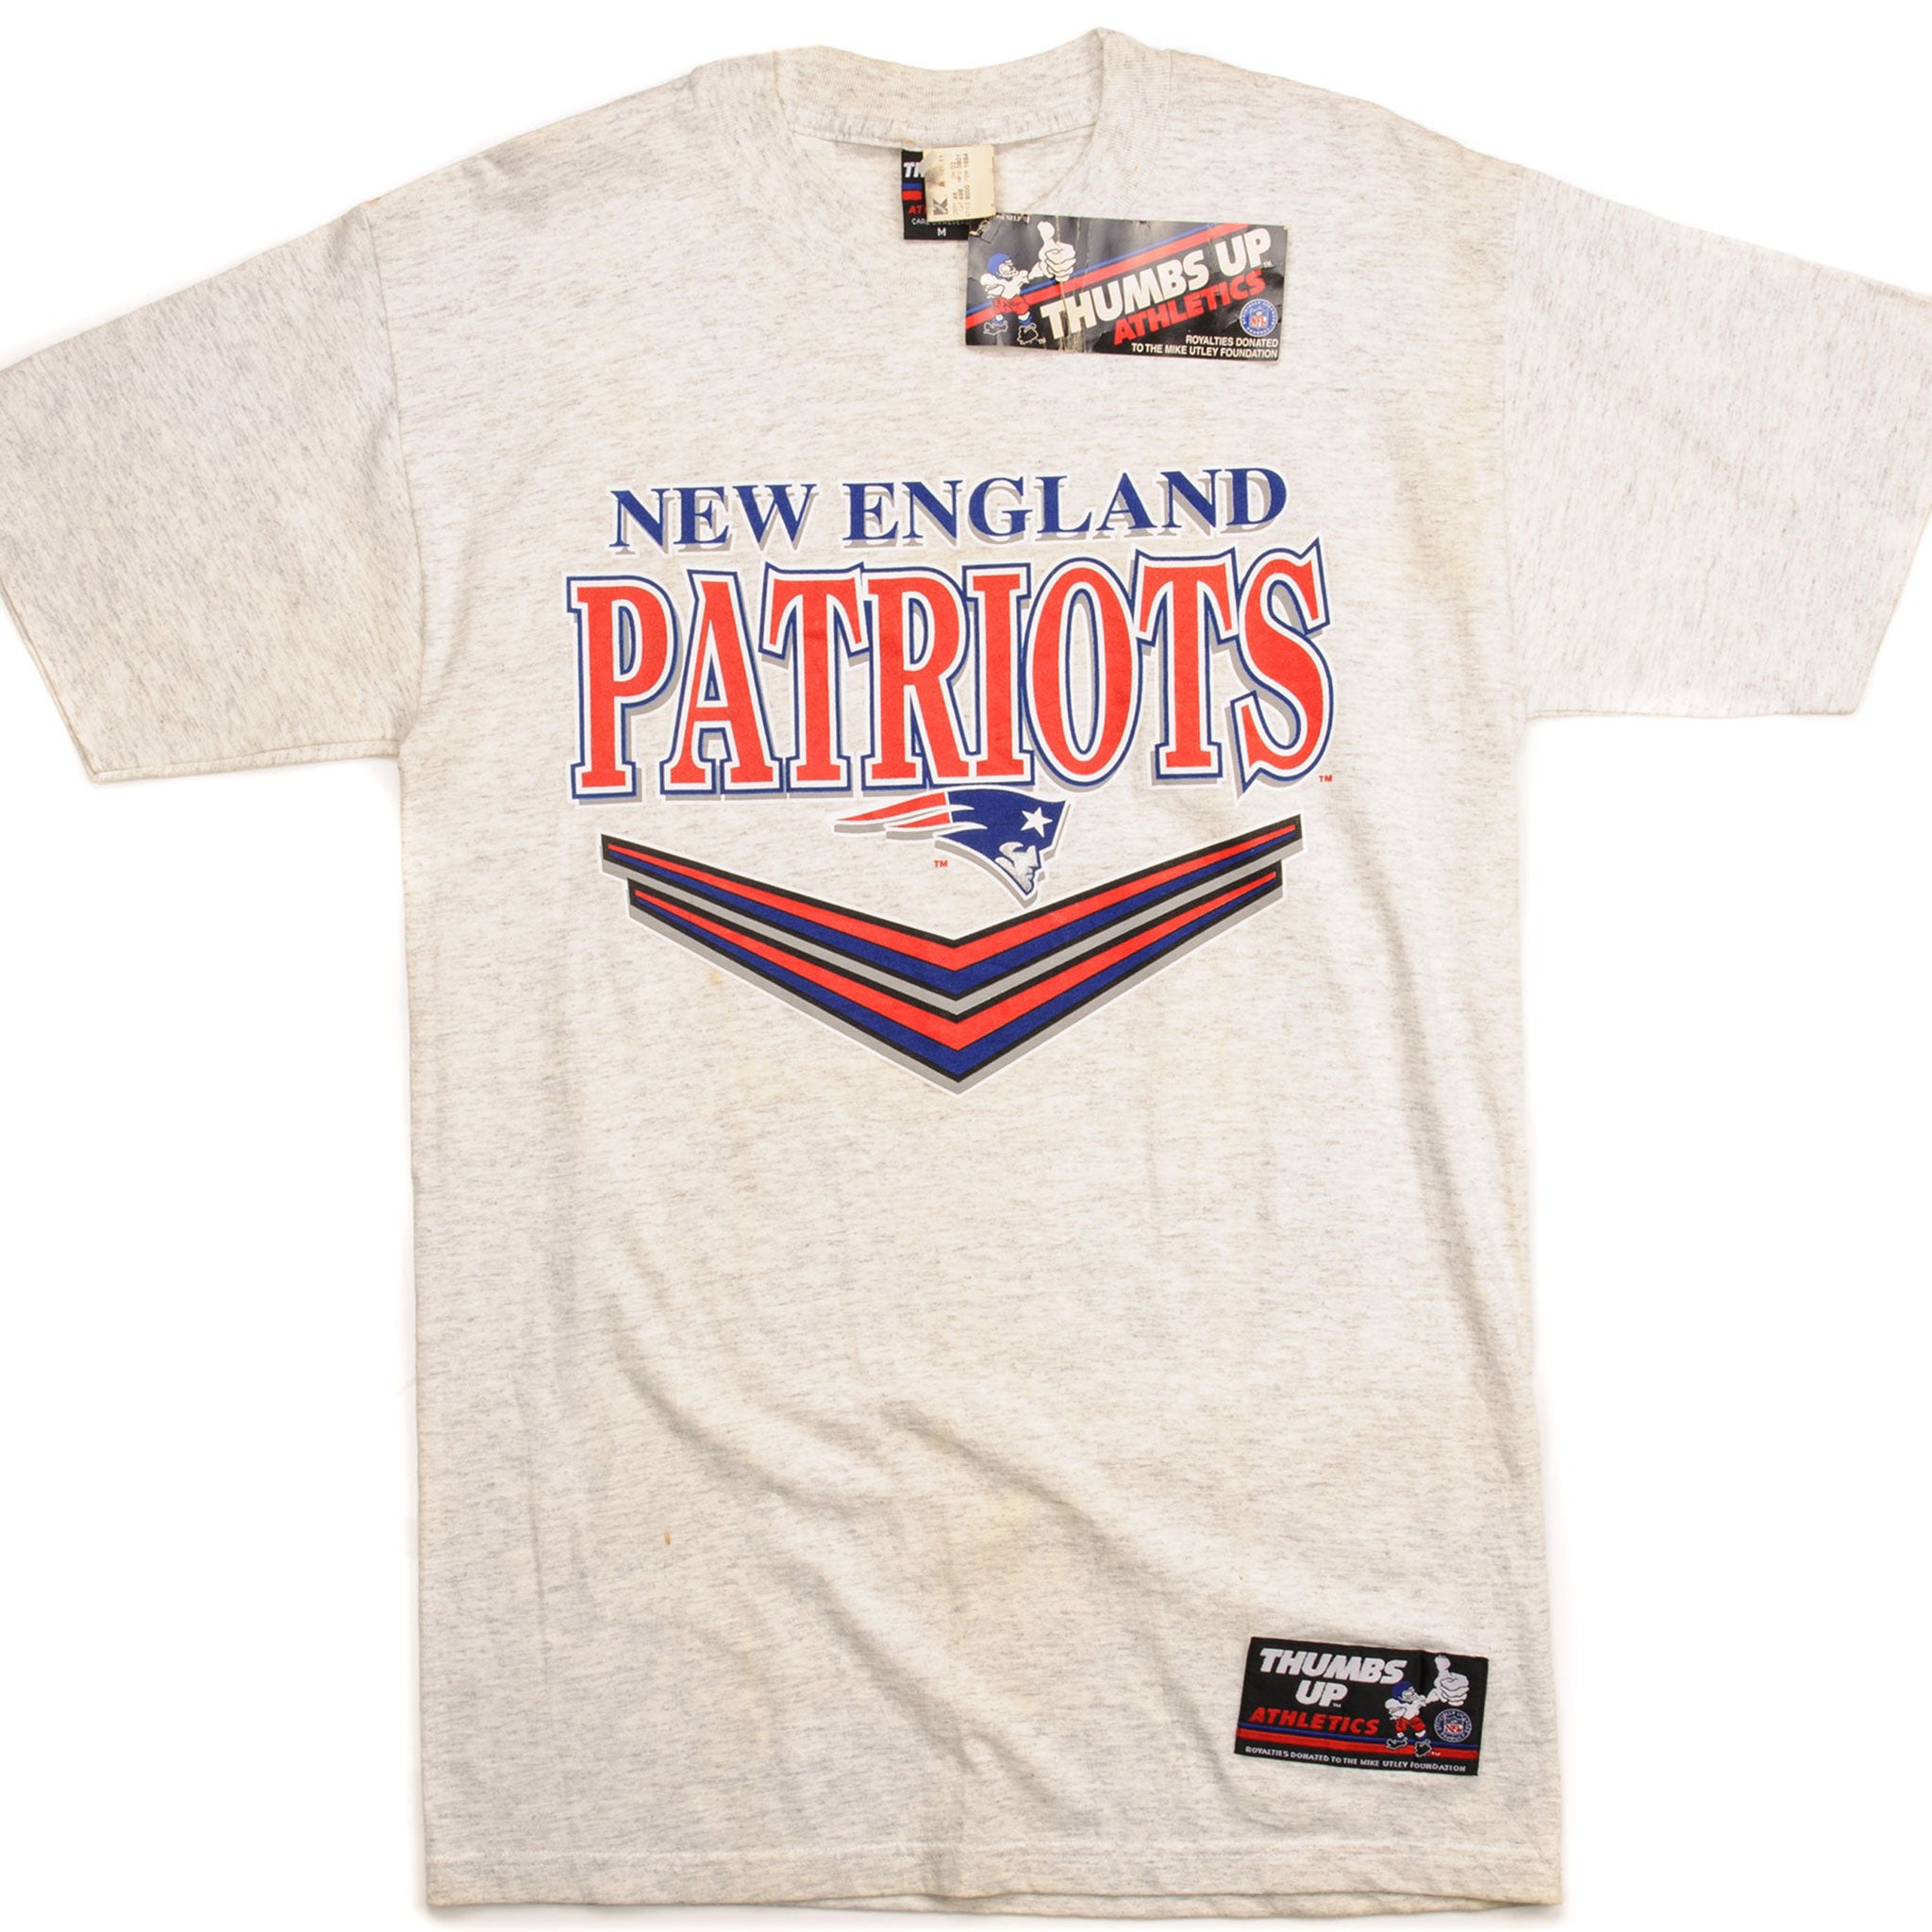 Sports / College Vintage NFL New England Patriots Tee Shirt 1990s Size Medium Made in USA